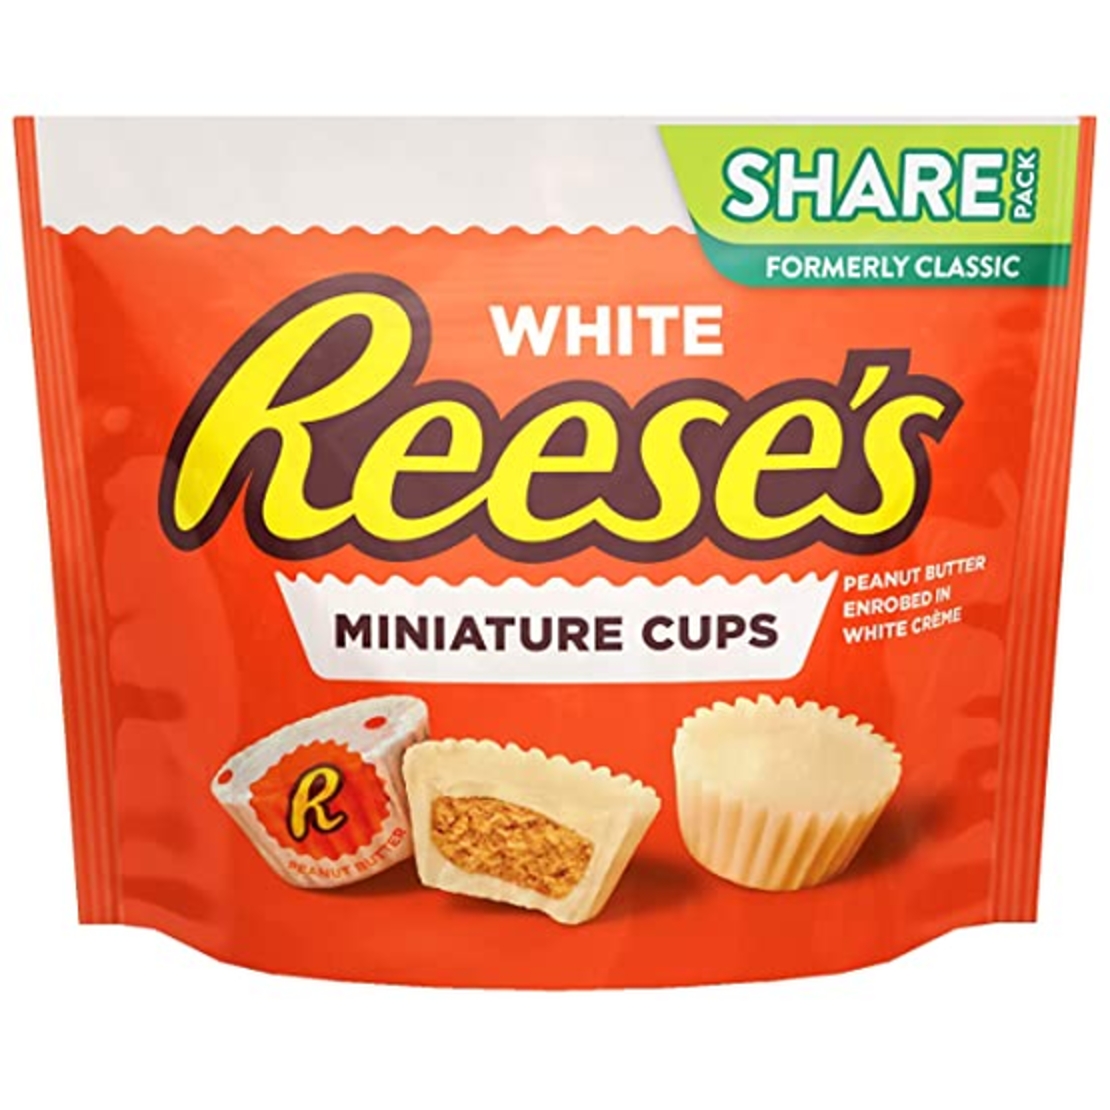 White Reese's - Miniature Cups Peanut Butter 297g